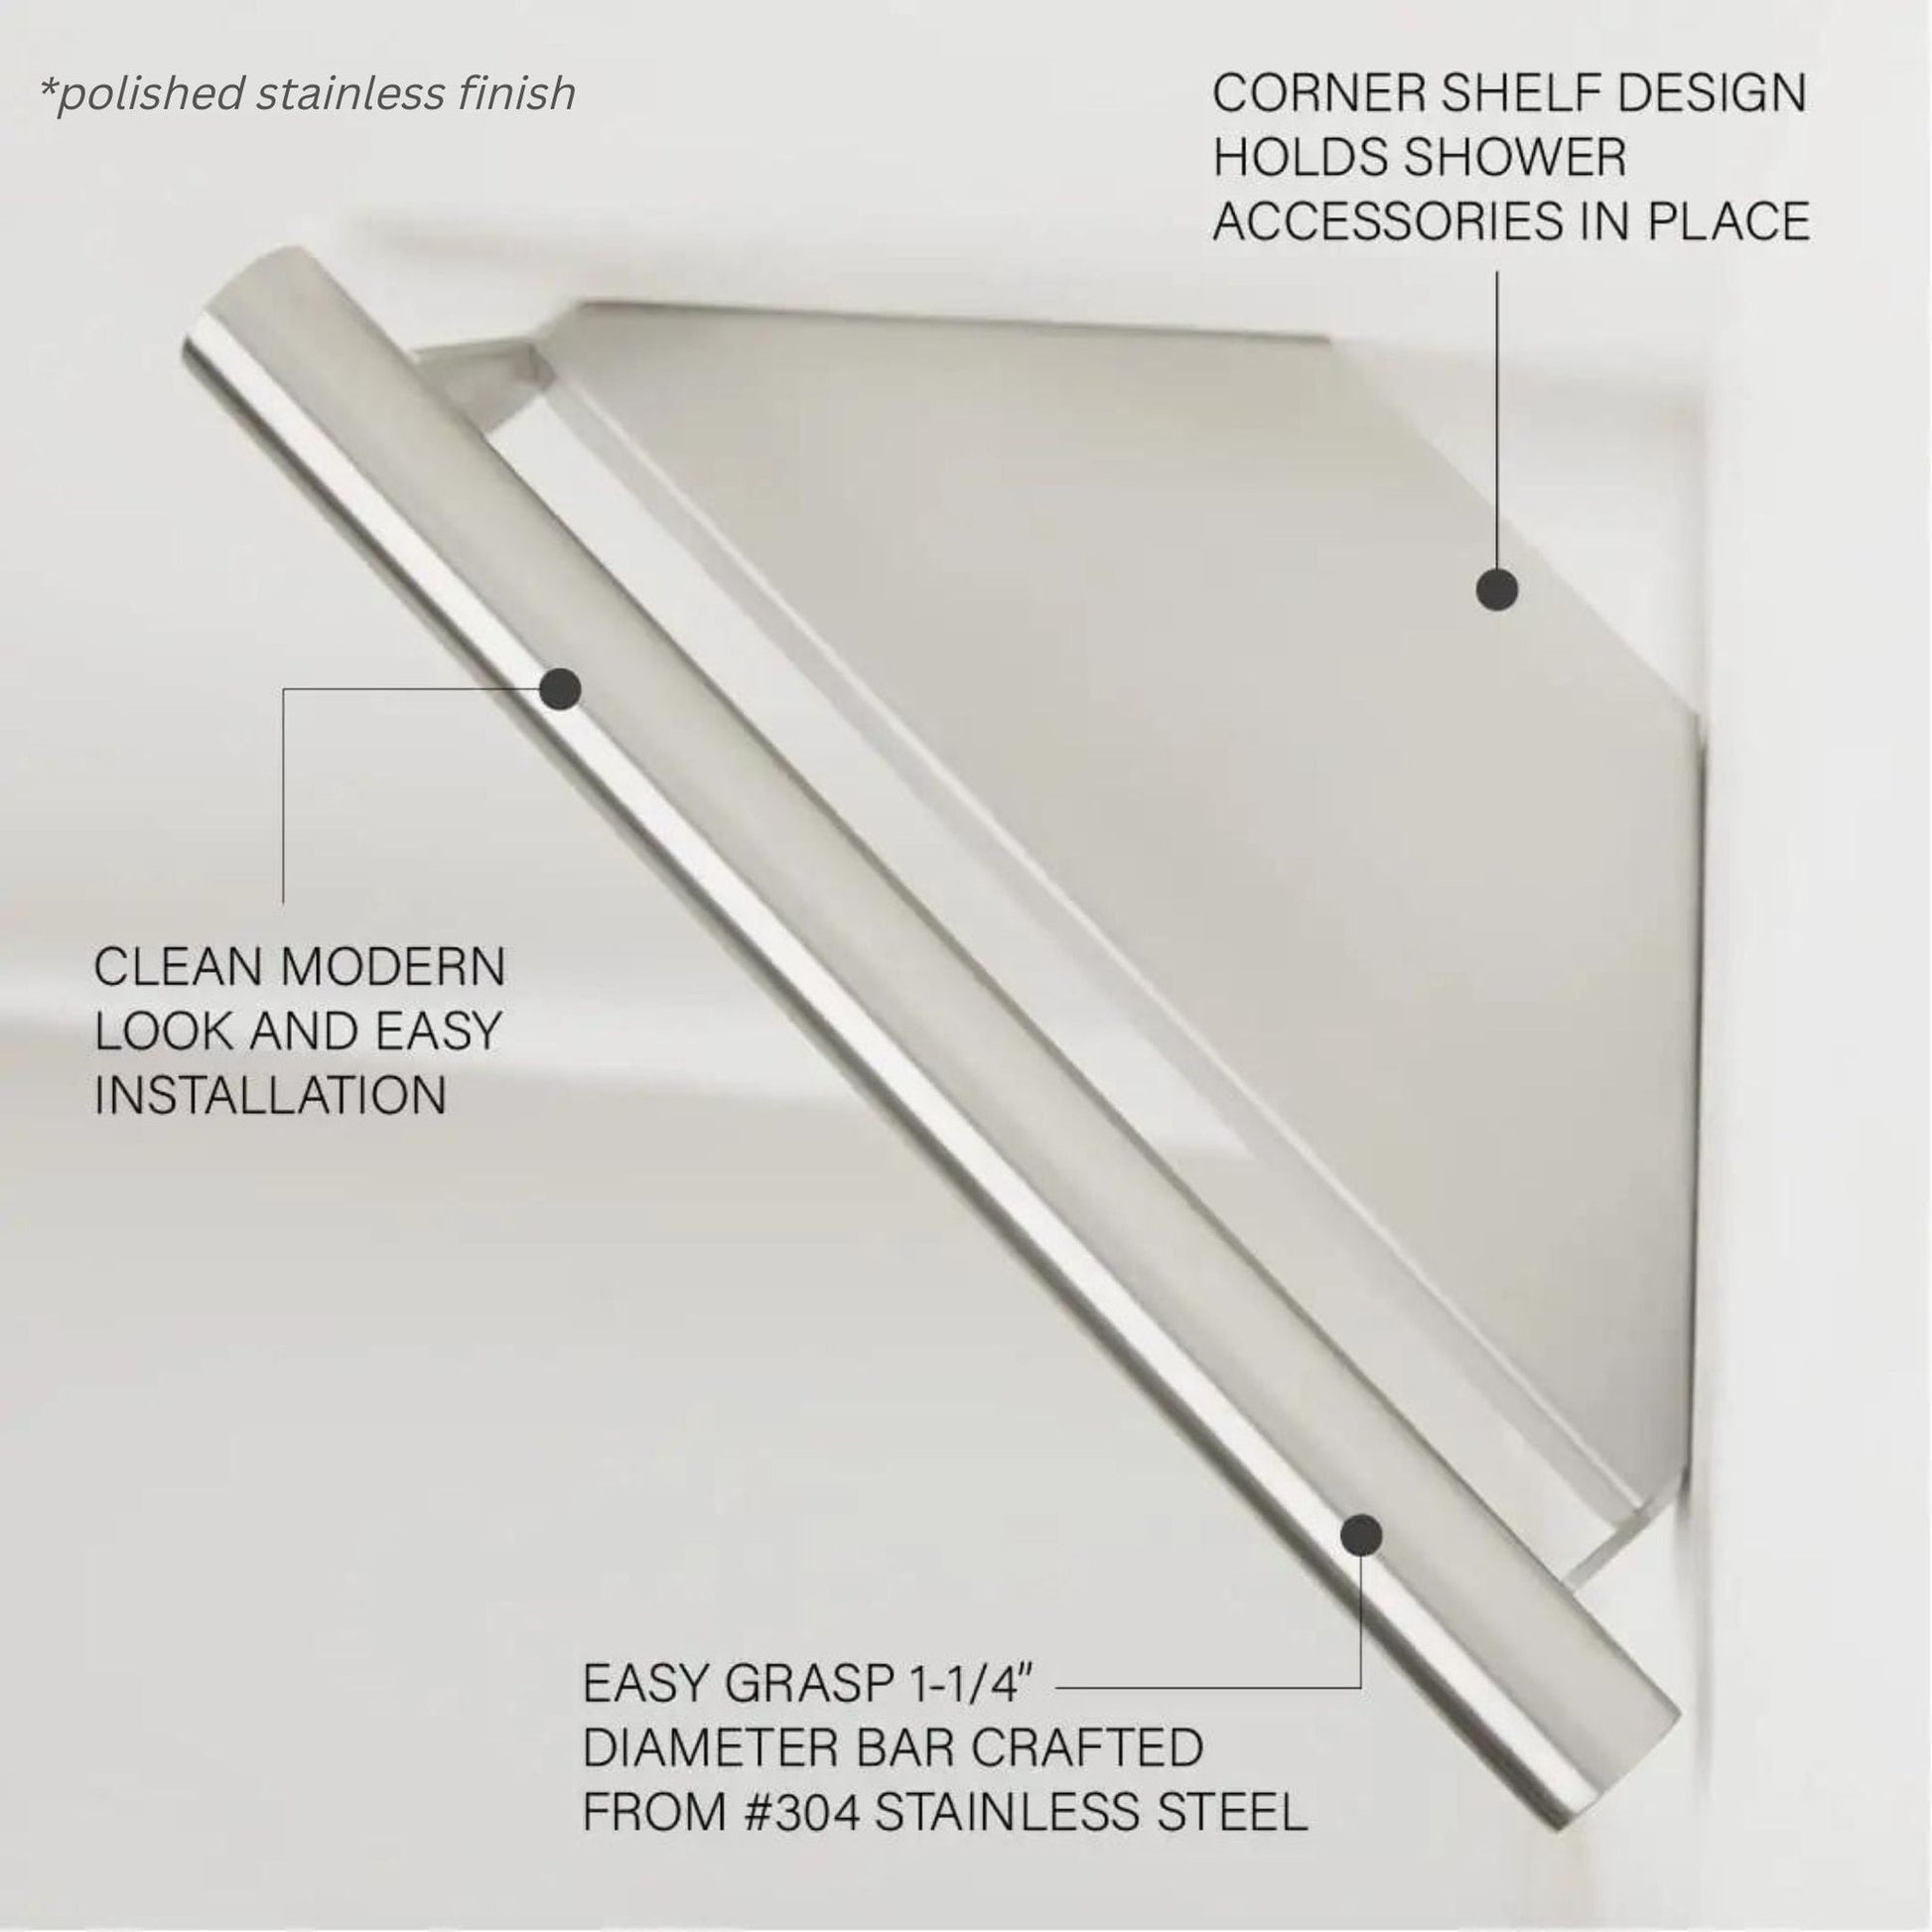 Seachrome Lifestyle and Wellness Series 14" x 8.5" Corner Shower Shelf With Handle in Almond Powder Coated Stainless Finish